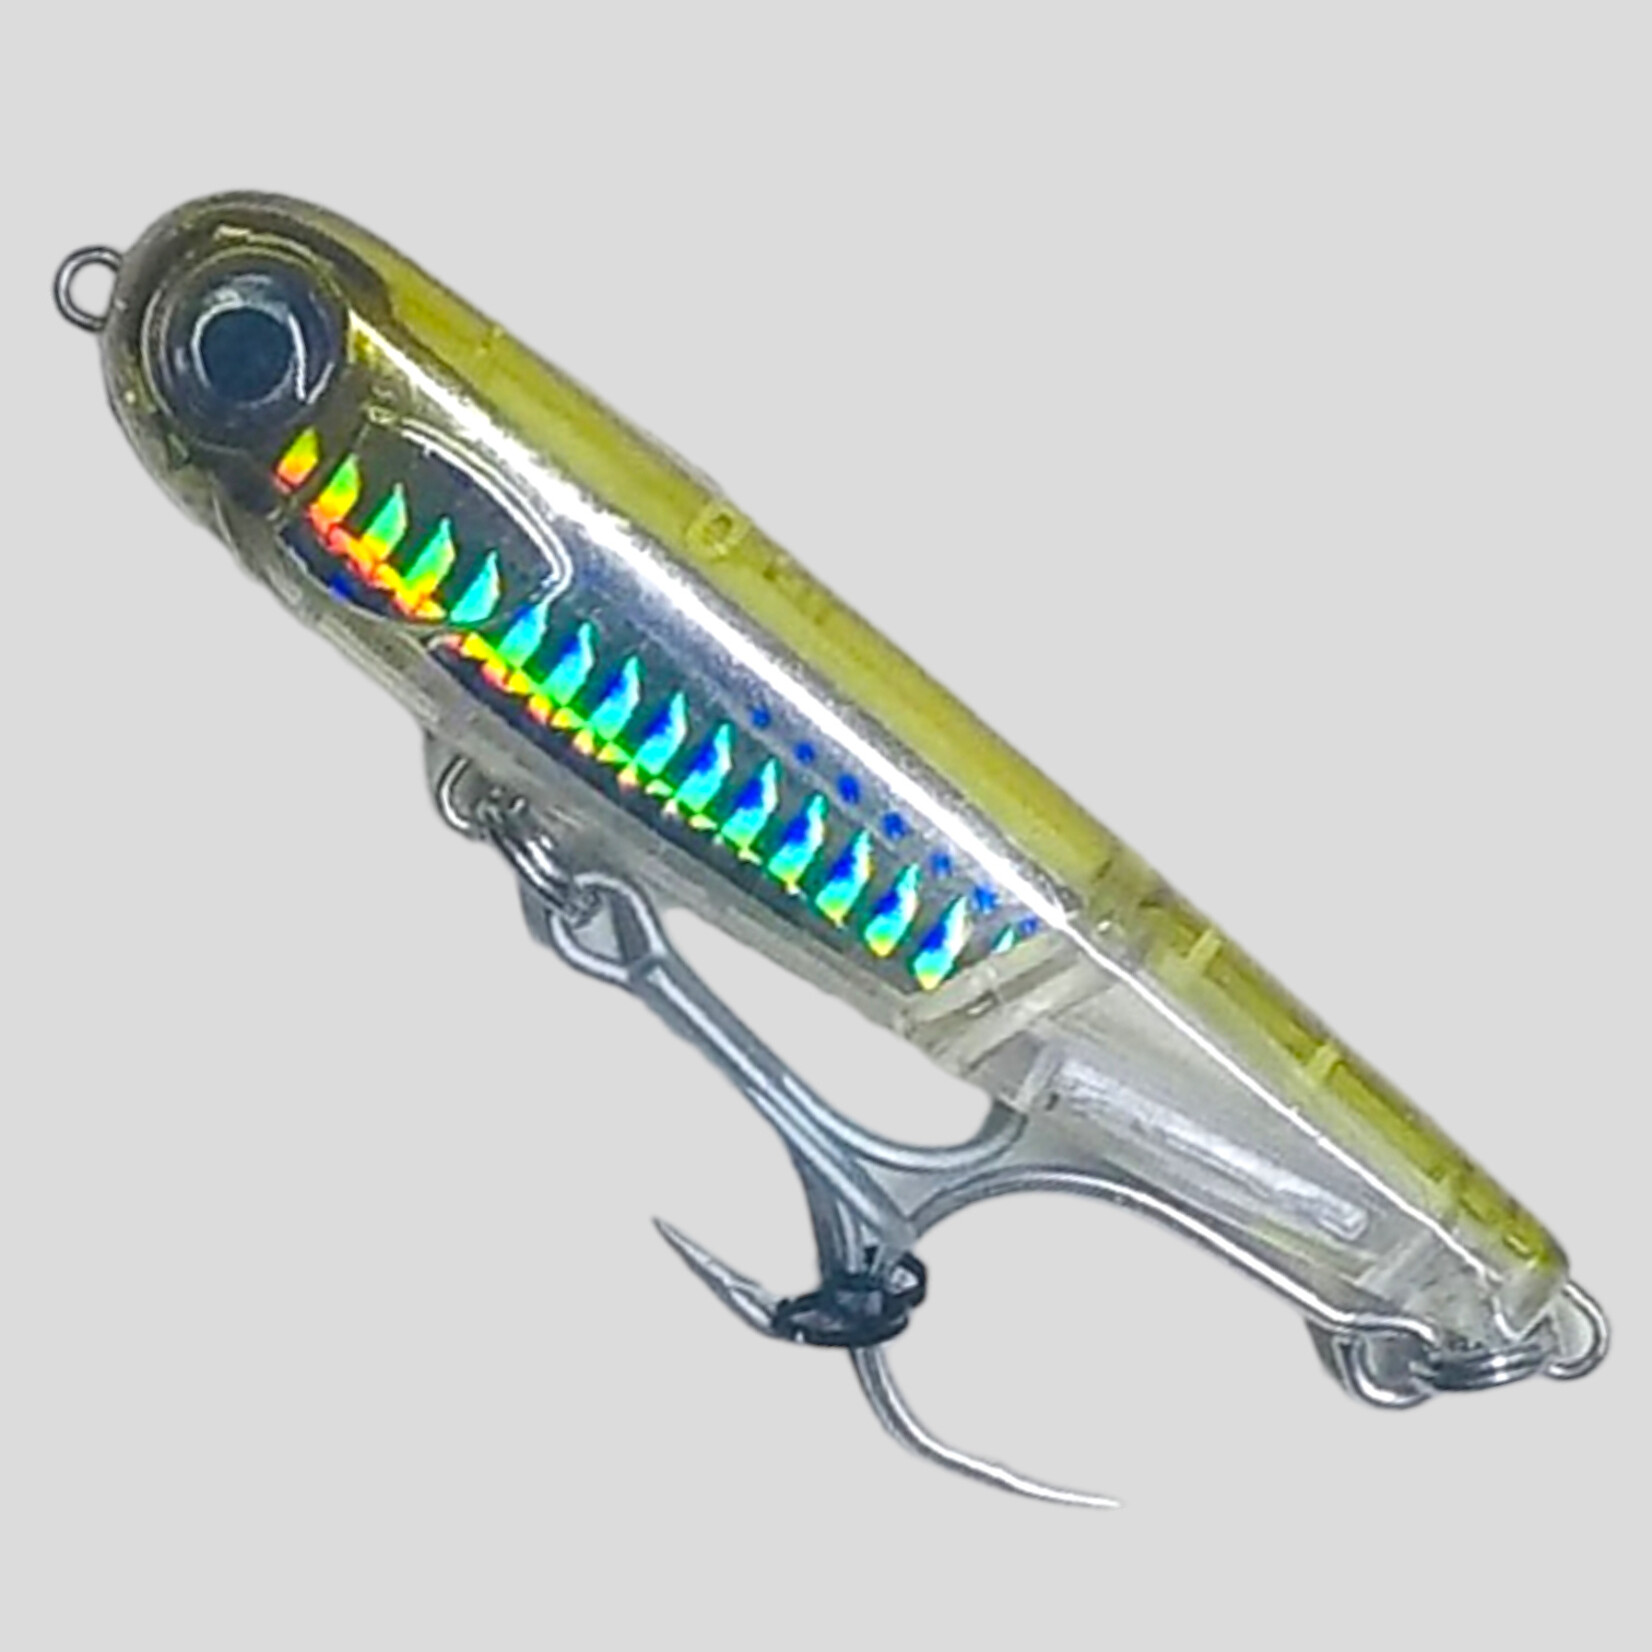 Monomy Tackle Monomoy Tackle Z-Step